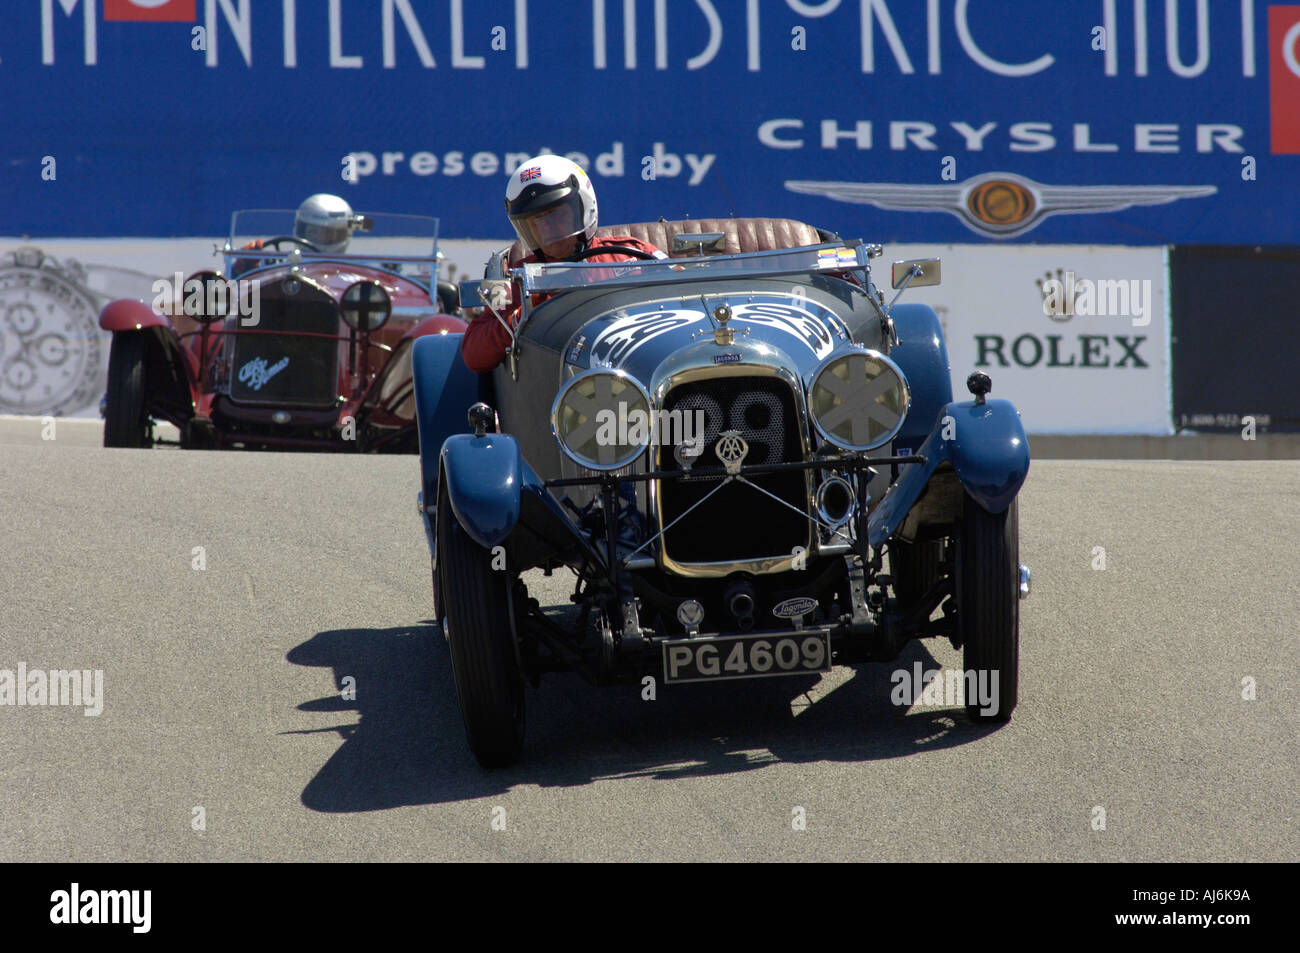 Graham Willis in his 1929 Lagonda is followed by Rick Rawlins in his 1931 Alfa Romeo 6C 1750 at the Monterey Historic Races 2005 Stock Photo